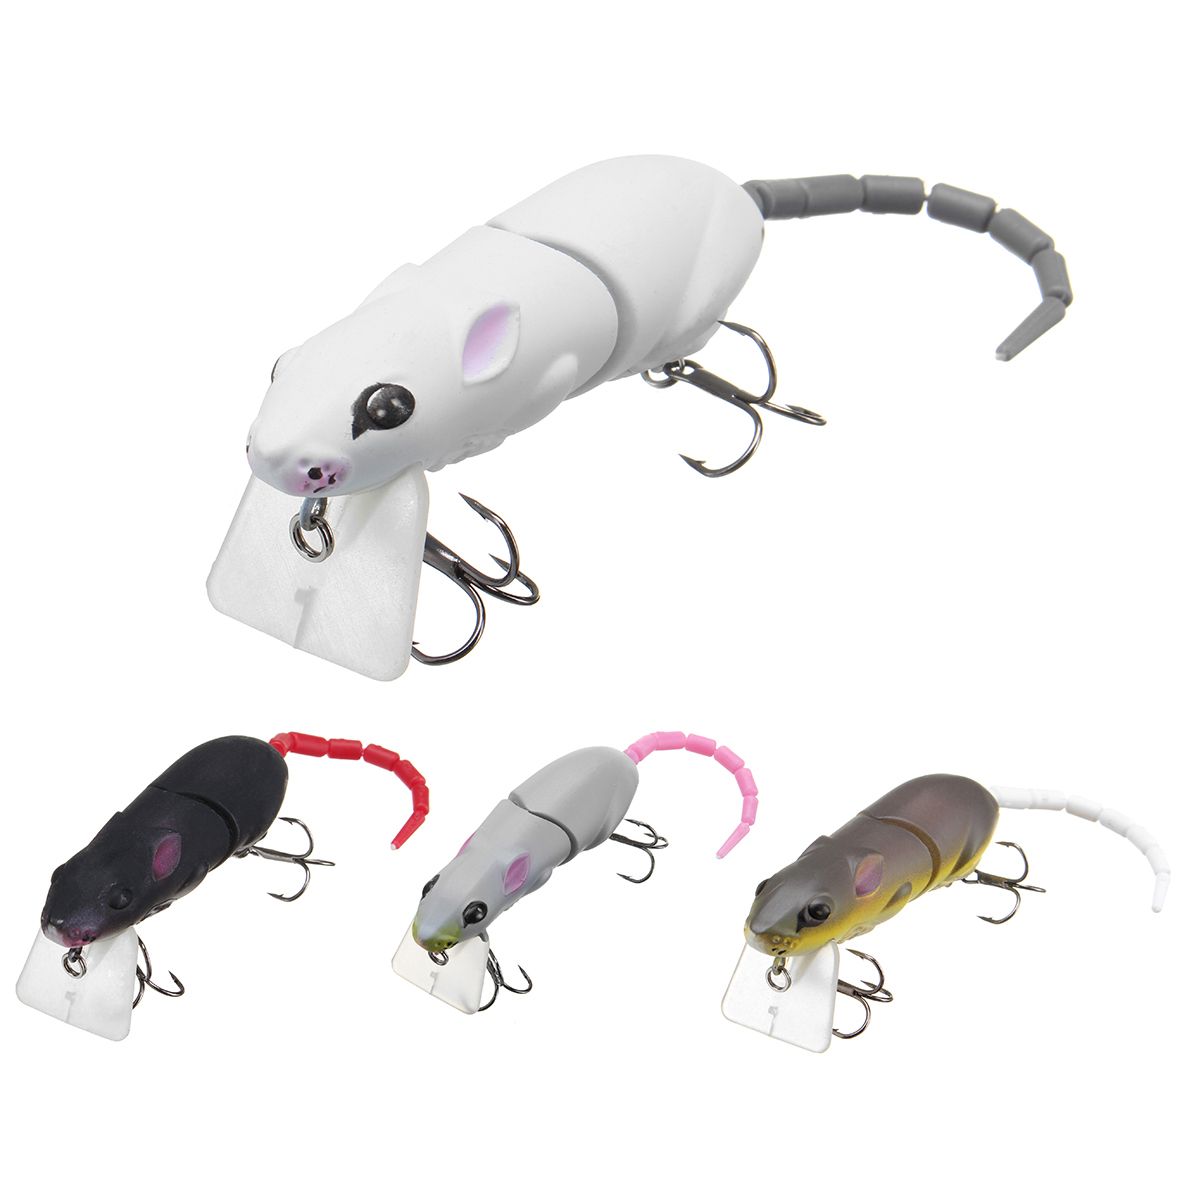 25cm-155g-Jointed-Rat-Fishing-Lure-Mouse-Floating-Crankbait-Sea-Topwater-3D-Eyes-Artificial-Baits-1354966-1